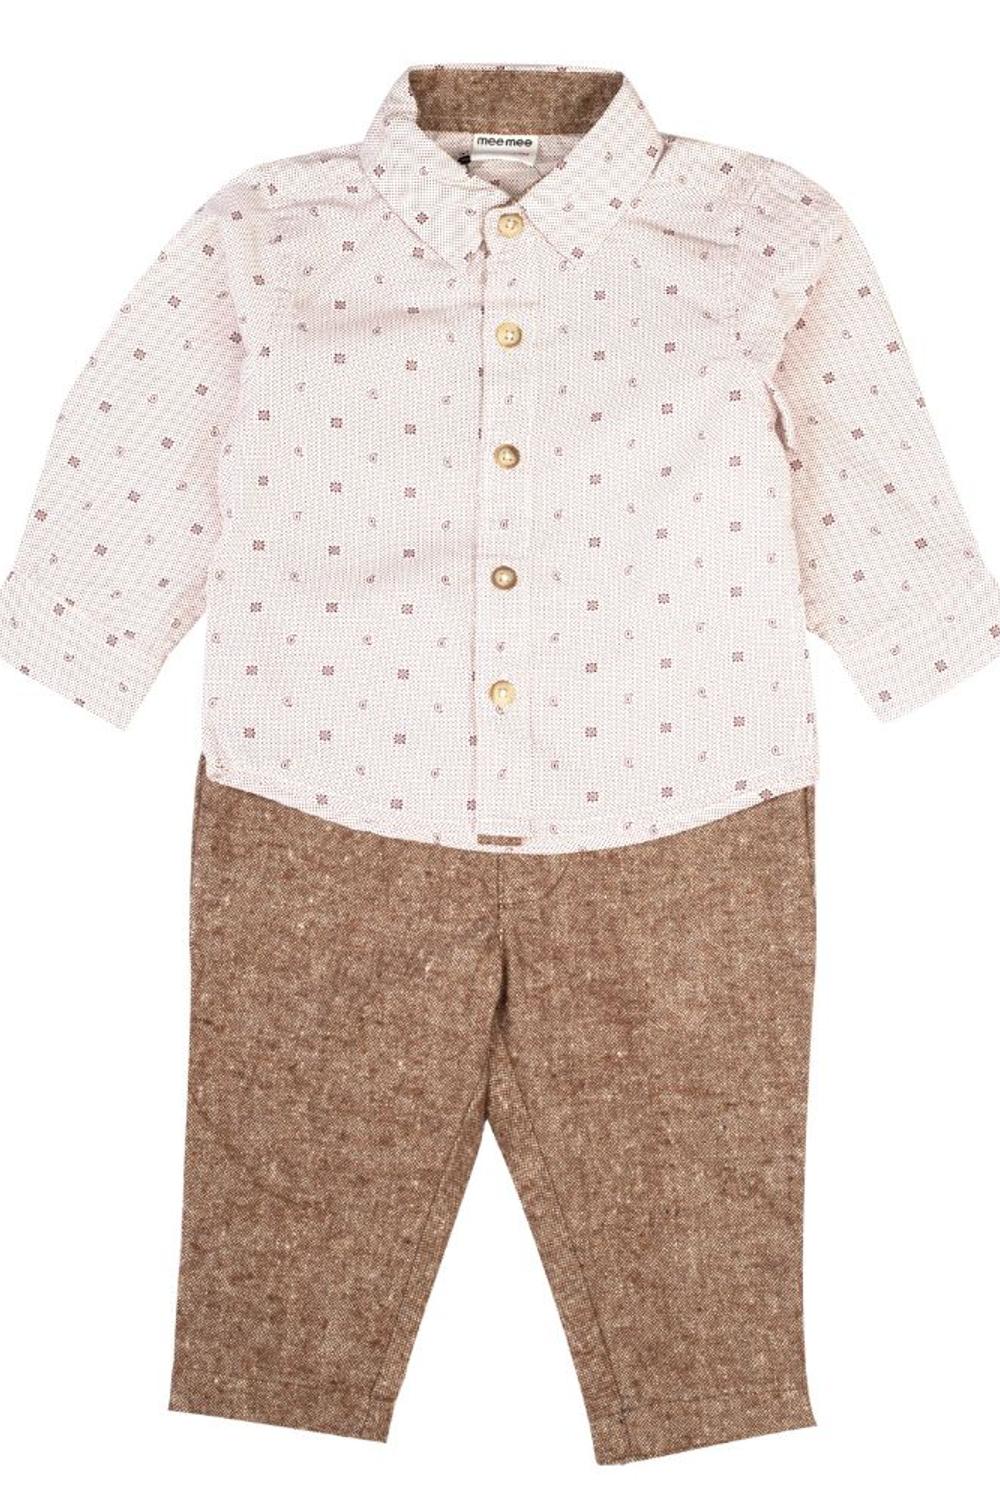 Mee Mee Boys Full Sleeve Shirt With Cotton Full Length Pant Set